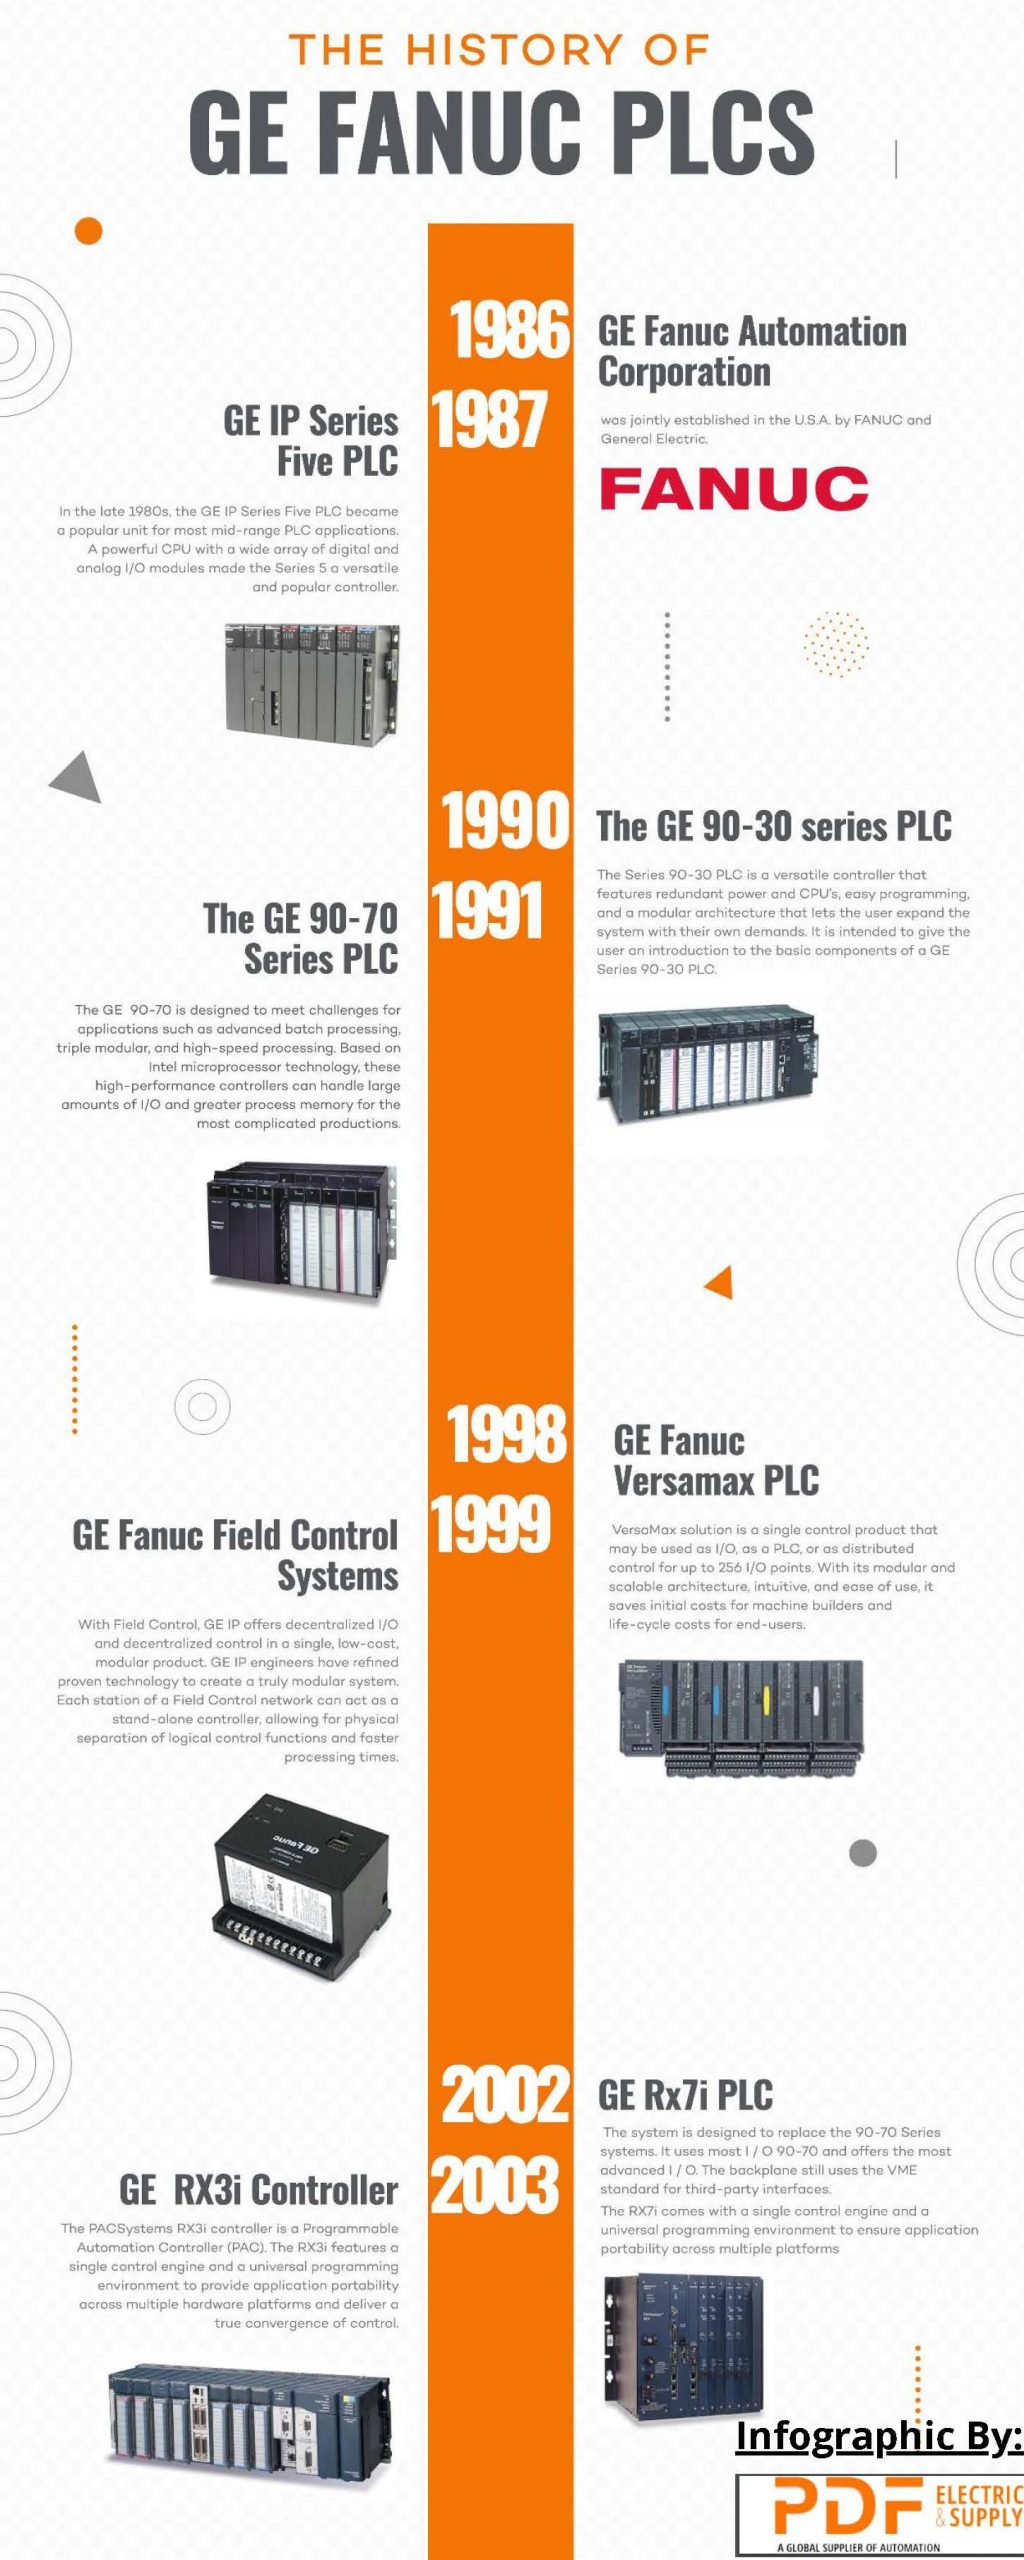 The History of GE Fanuc PLCs